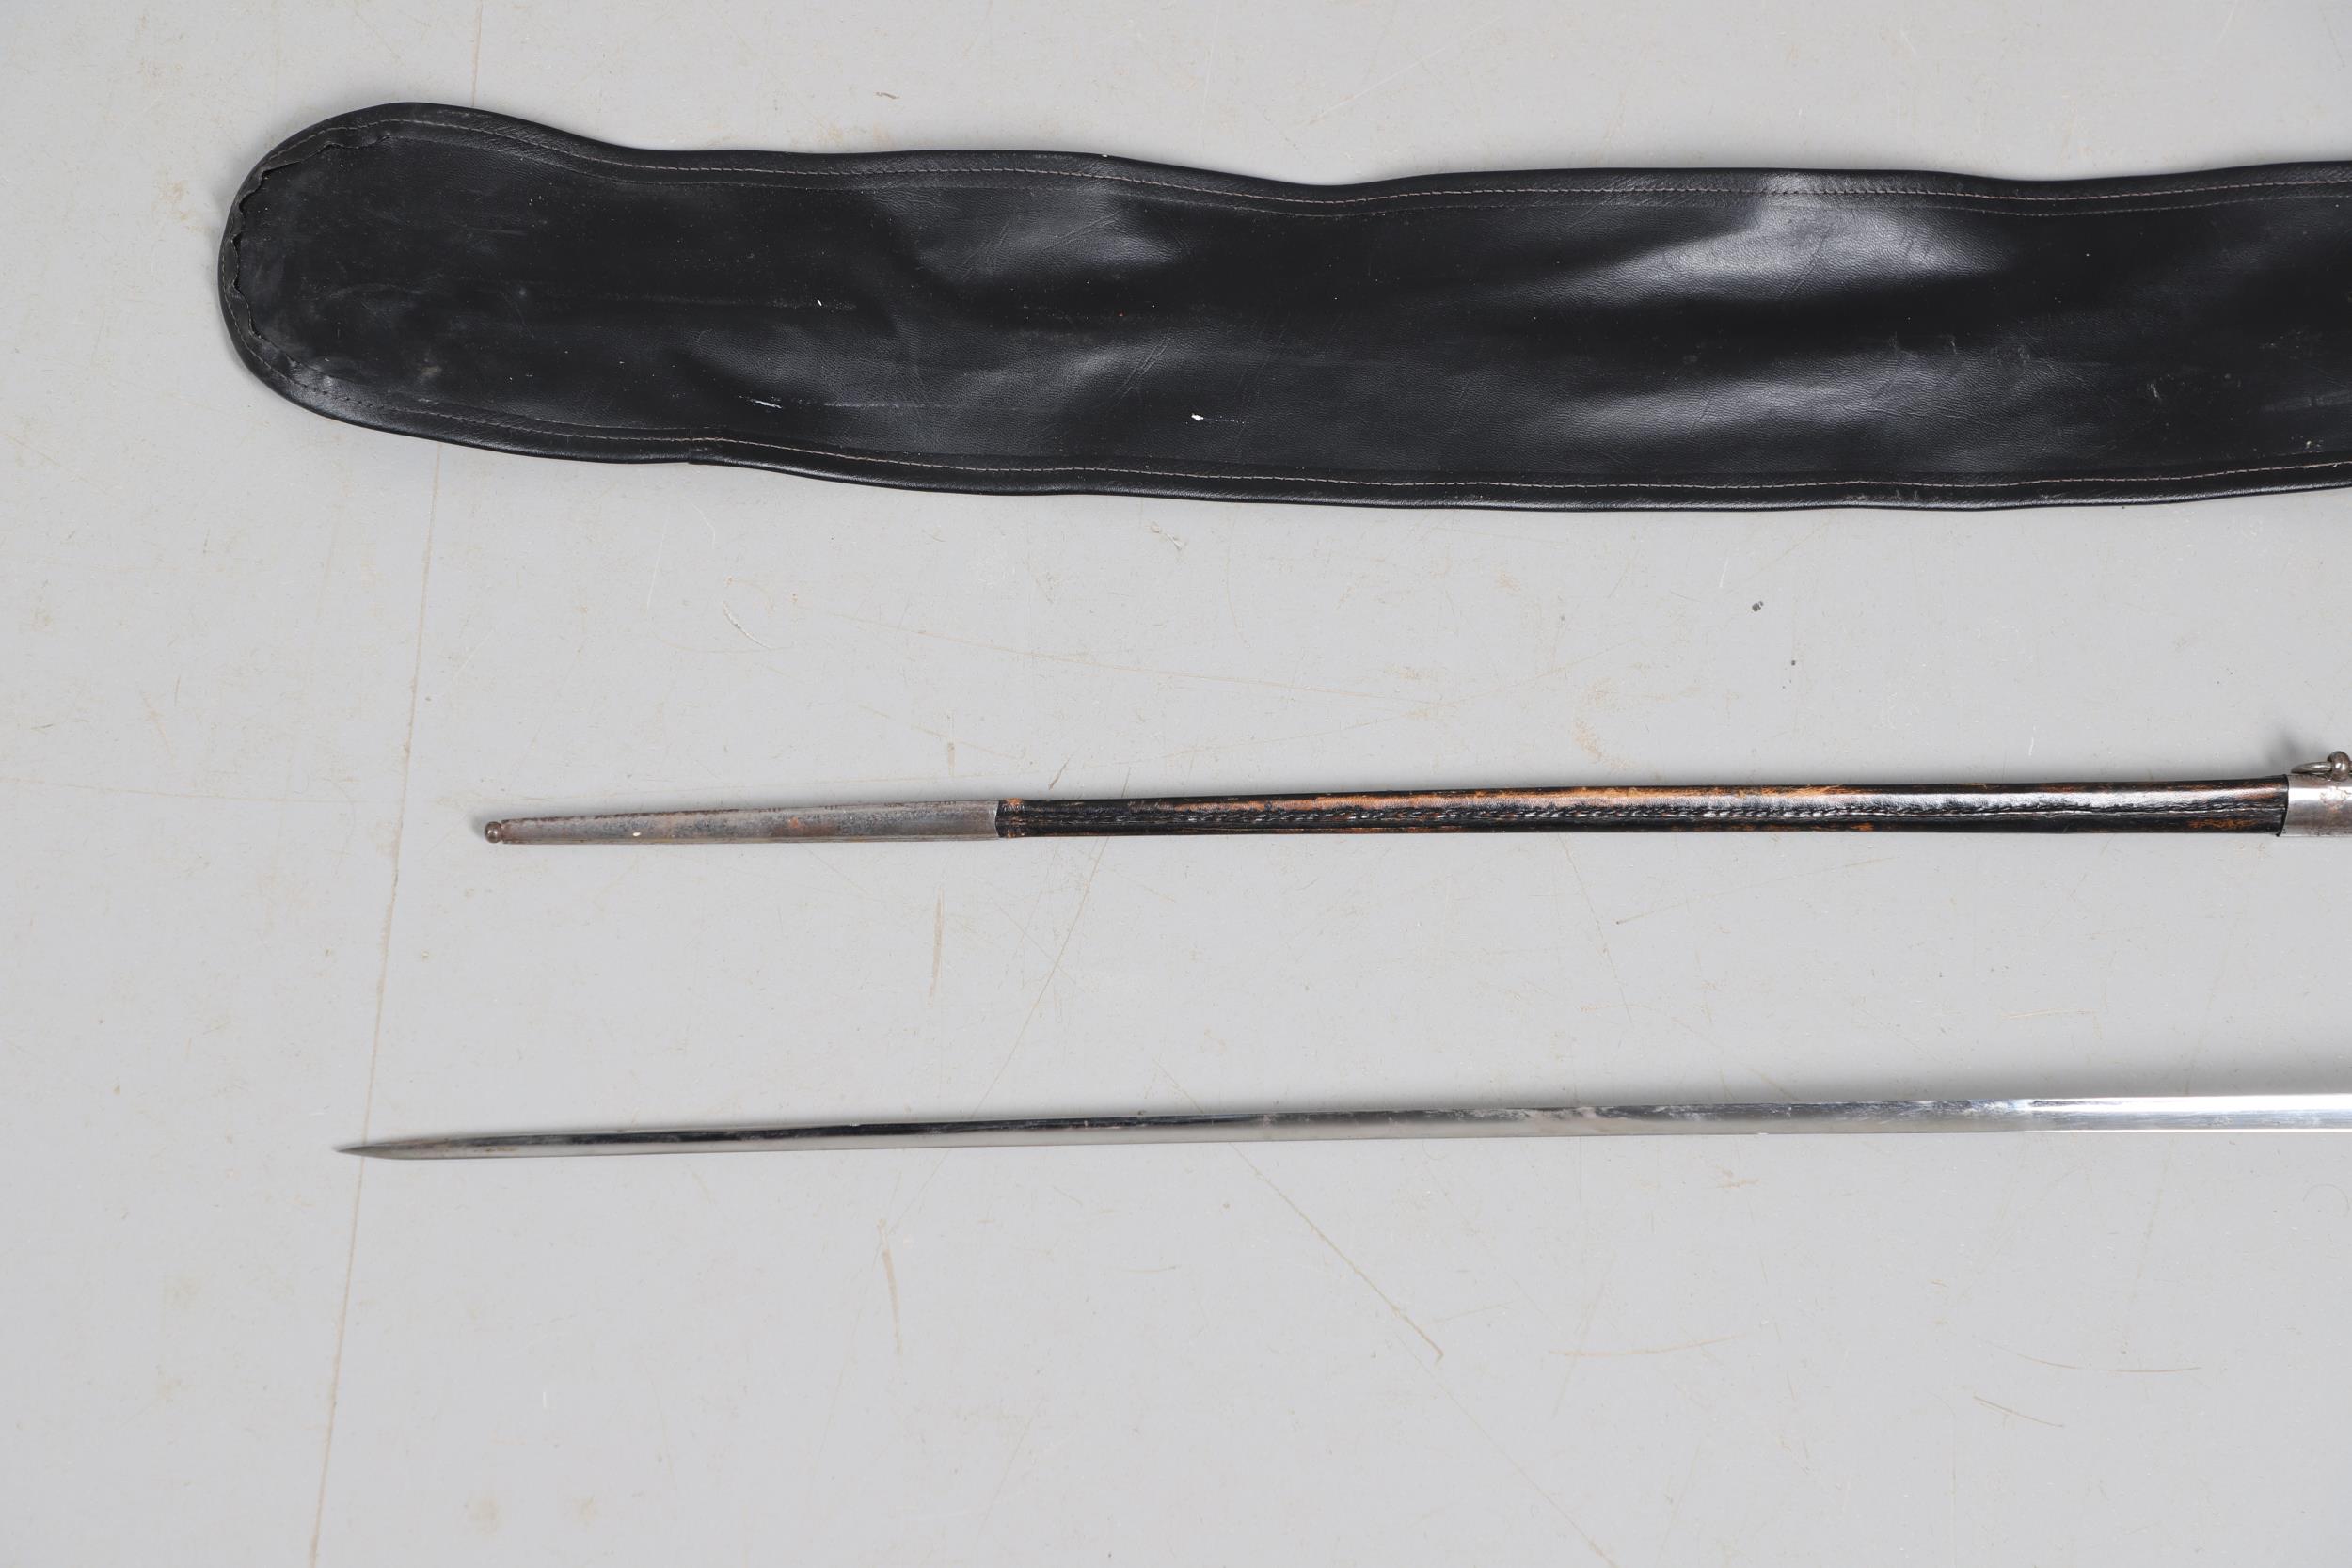 A WILKINSON COURT SWORD HAVING BELONGED TO THE HIGH SHERIFF OF WARWICKSHIRE. - Image 16 of 17